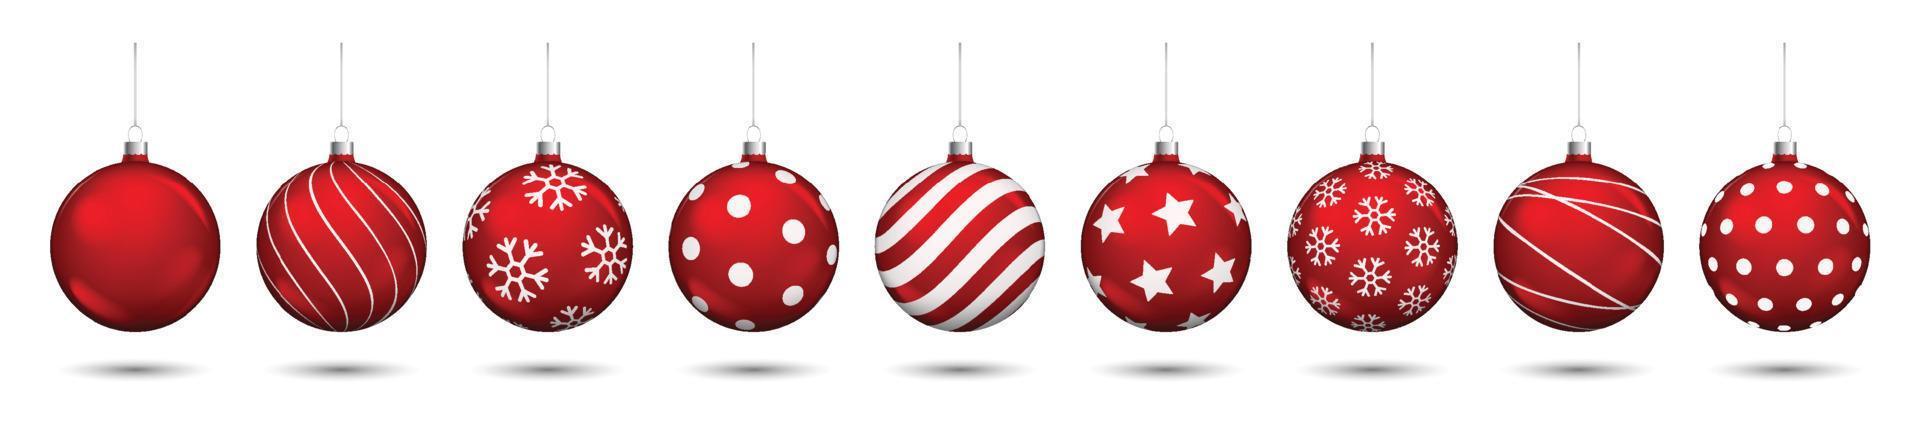 Red christmas balls decoration isolated on white background. vector